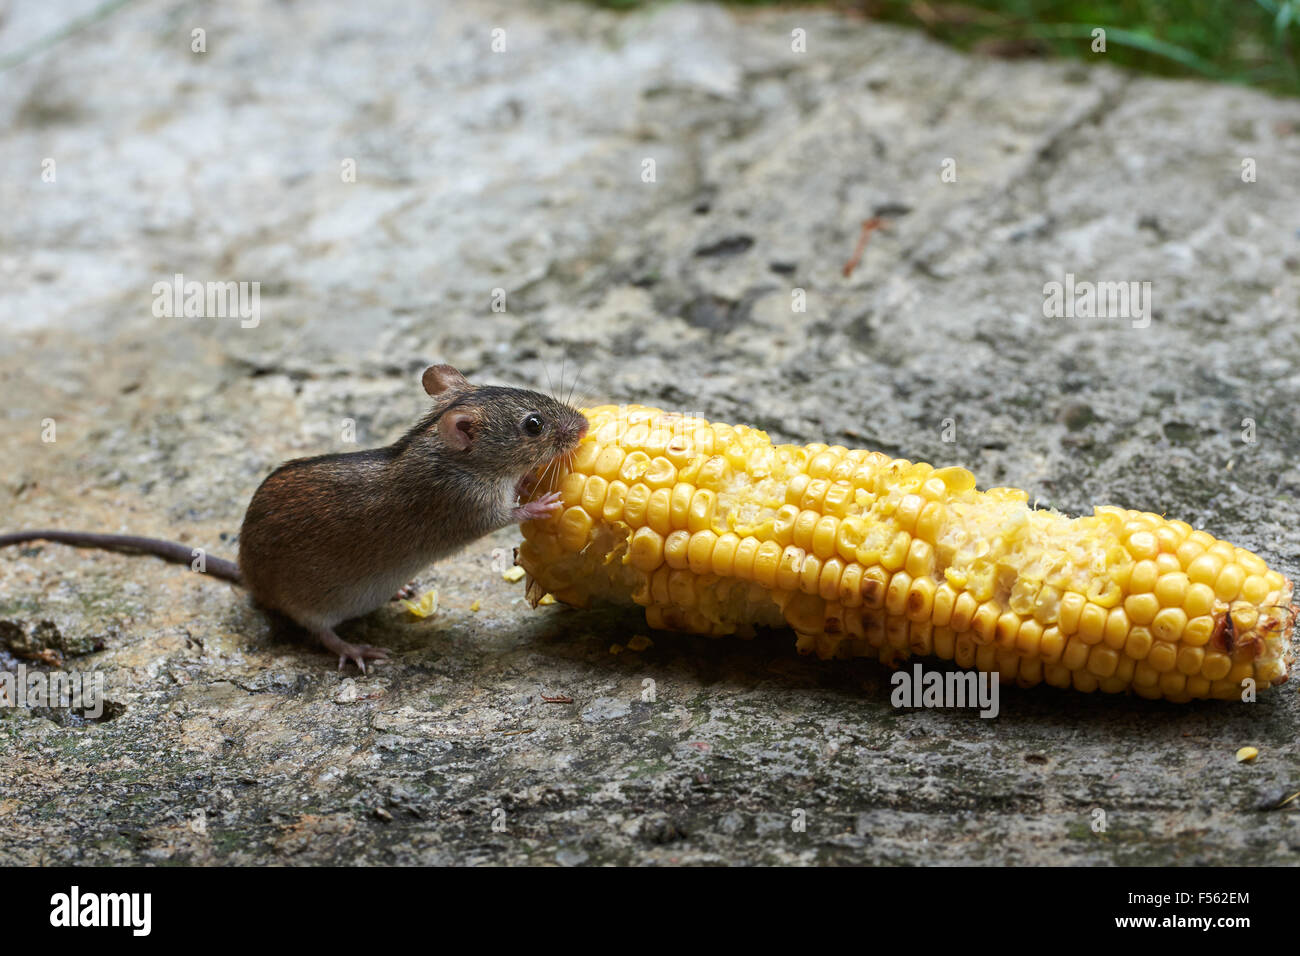 19.07.2015, Berlin, Berlin, Germany  - The fire mouse (Apodemus agrarius) counts within the family of muridae (Muridae) to the kind of wood mice (Apodemus). In English, the Fire Mouse Striped field mouse is called. 00Y150719D006CAROEX.JPG - NOT for SALE in G E R M A N Y, A U S T R I A, S W I T Z E R L A N D [MODEL RELEASE: NOT APPLICABLE, PROPERTY RELEASE: NO (c) caro photo agency / Teich, http://www.caro-images.pl, info@carofoto.pl - In case of using the picture for non-journalistic purposes, please contact the agency - the picture is subject to royalty!] Stock Photo